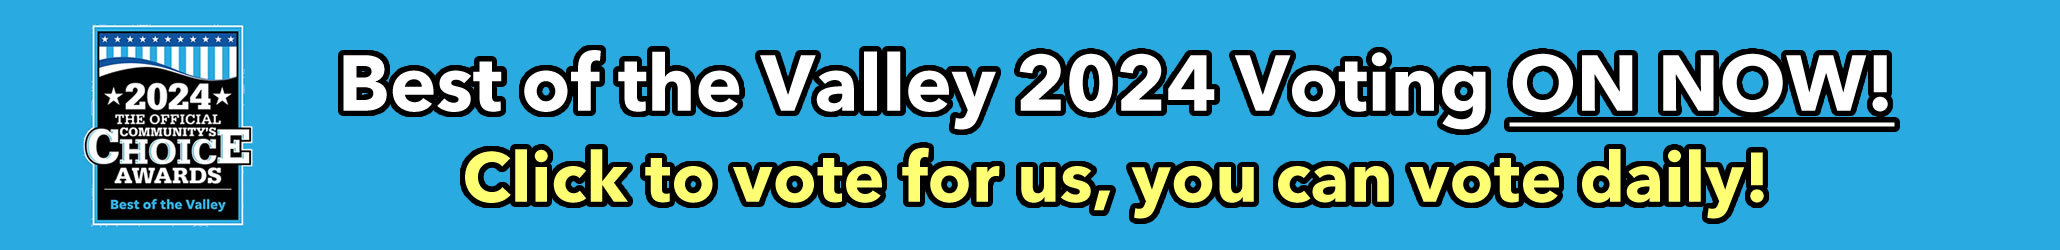 Best of the Valley 2024 Voting ON NOW! Click to vote for us, you can vote daily!